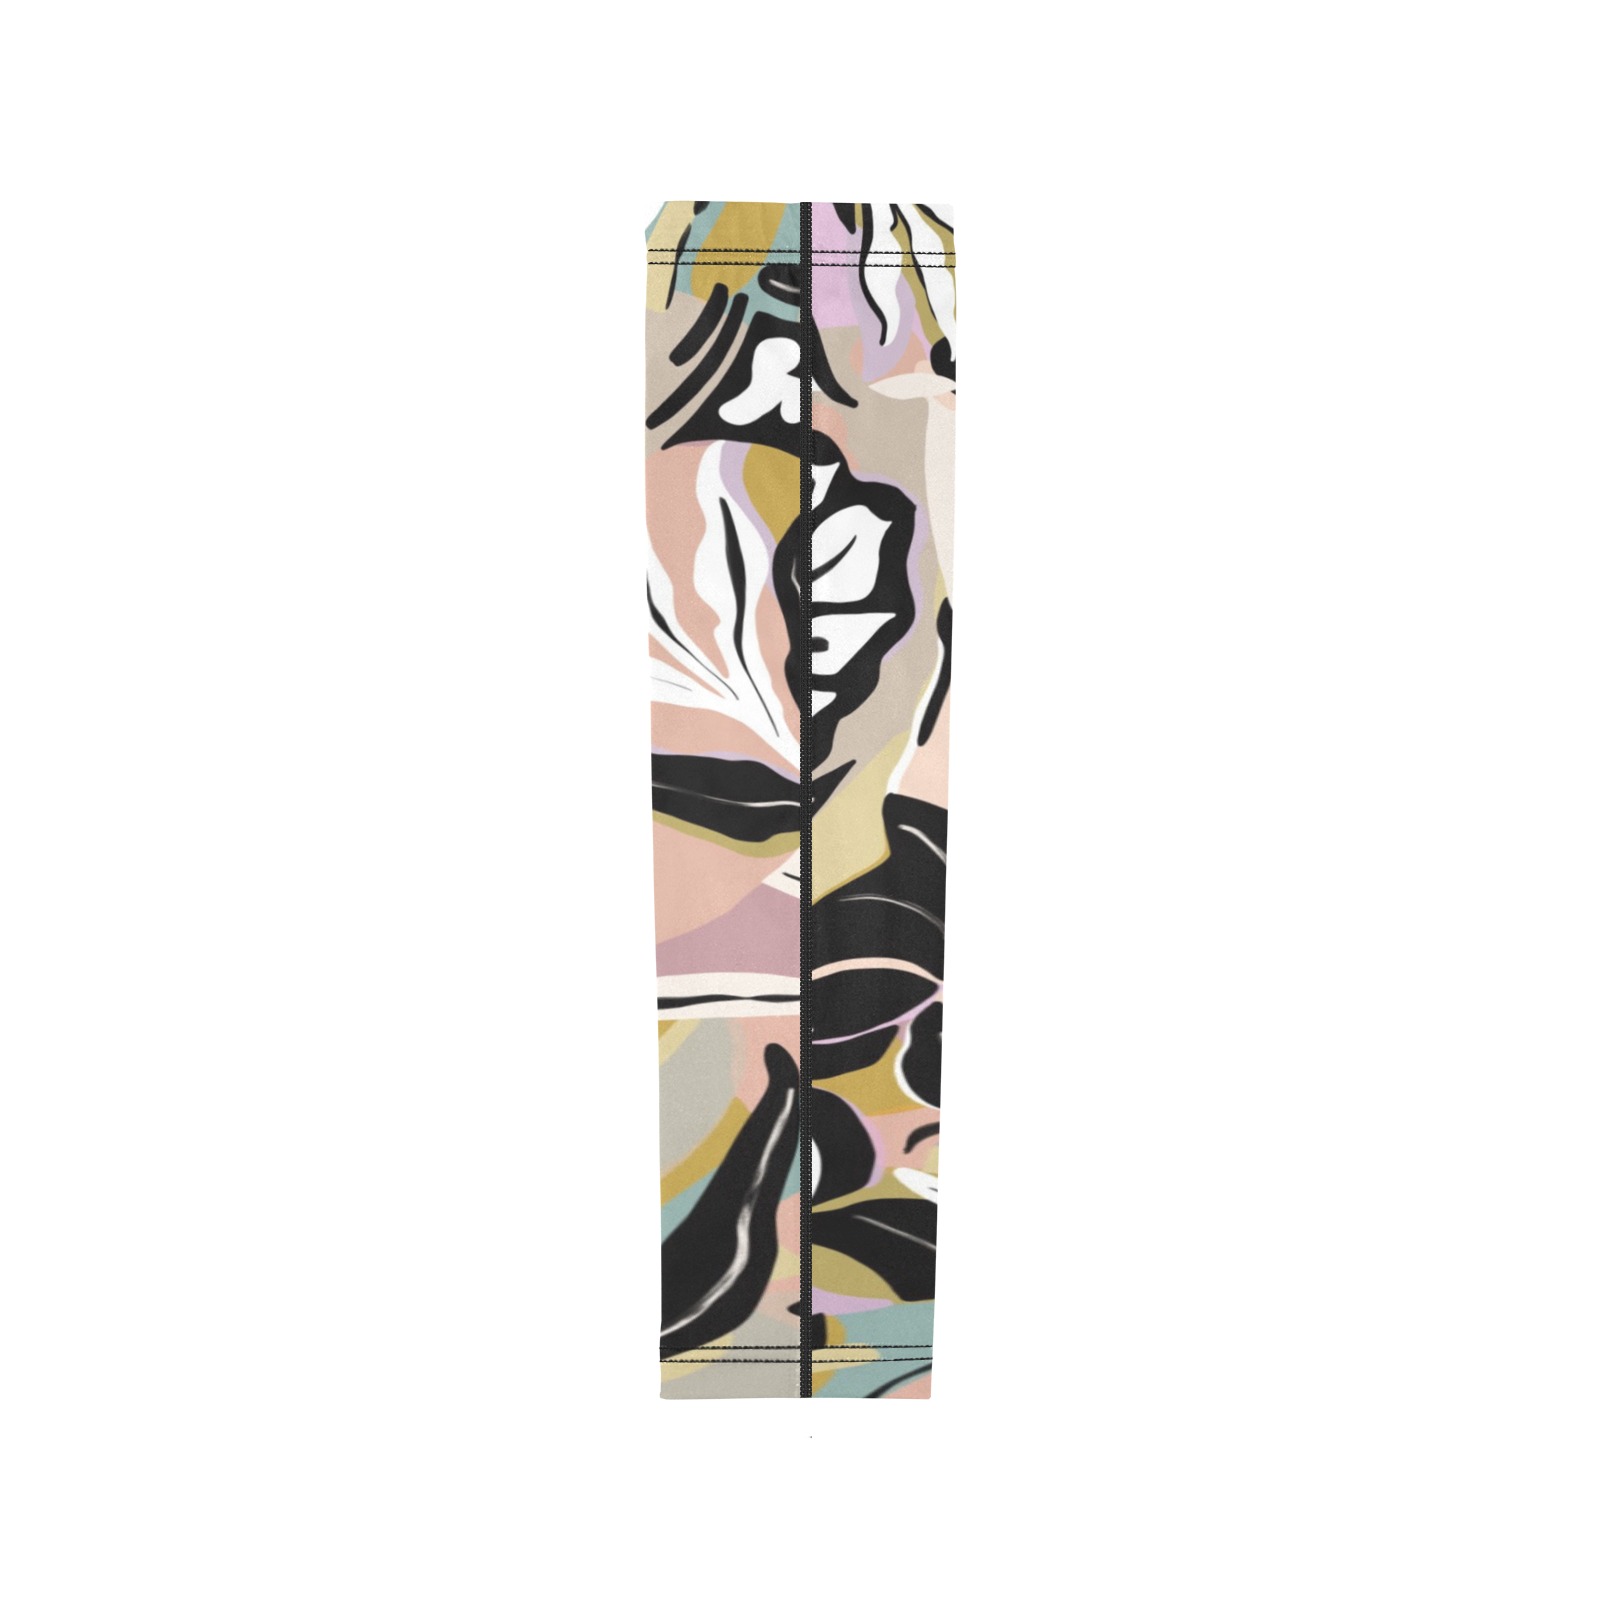 Tropical modern simple graphic Arm Sleeves (Set of Two)